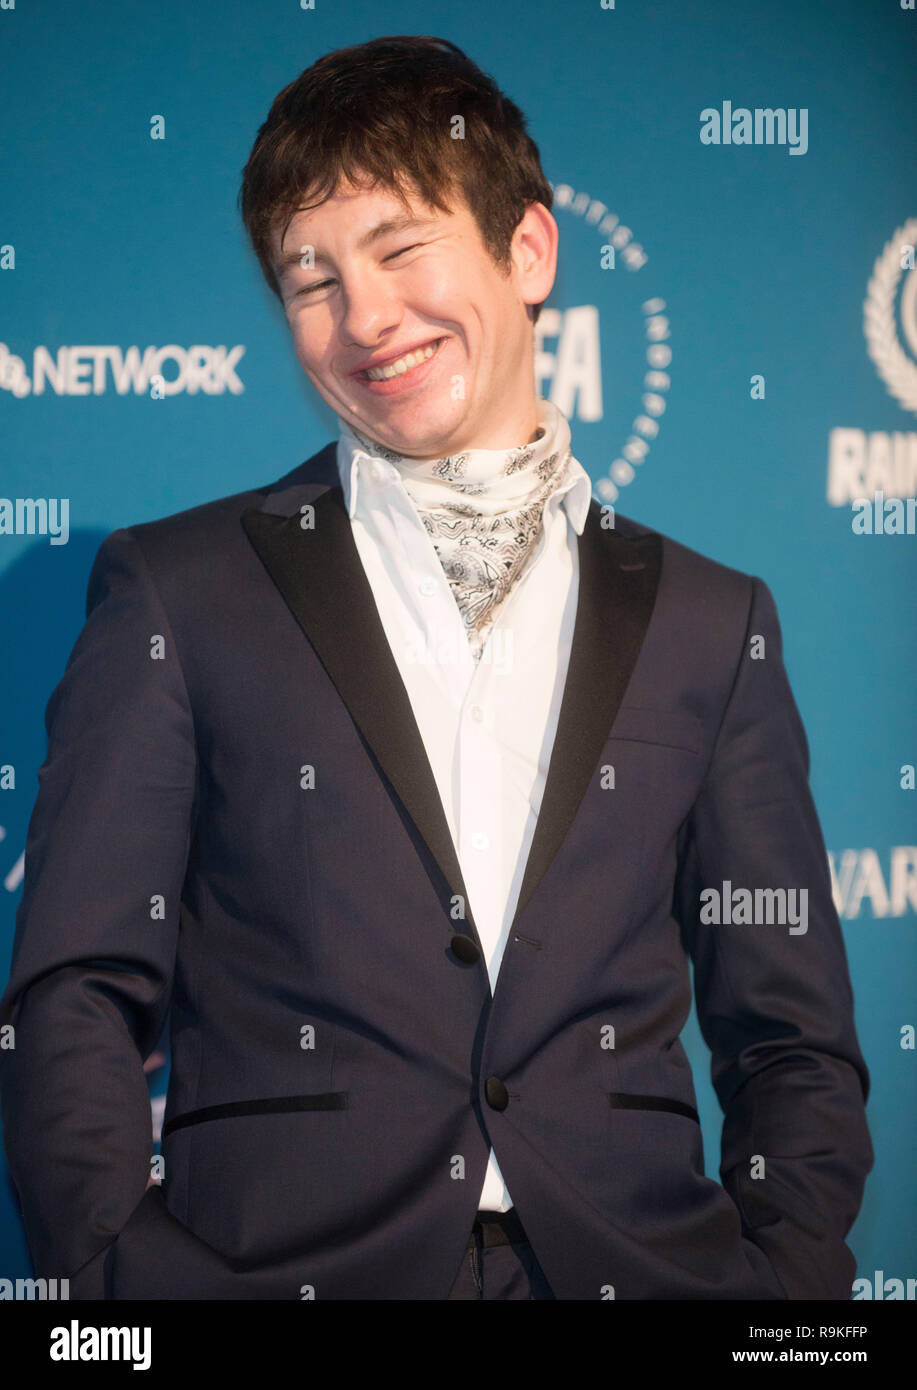 Barry Keoghan at the 21ST BRITISH INDEPENDENT FILM AWARDS  at Old Billingsgate, London, photo by Bran Jordan Stock Photo